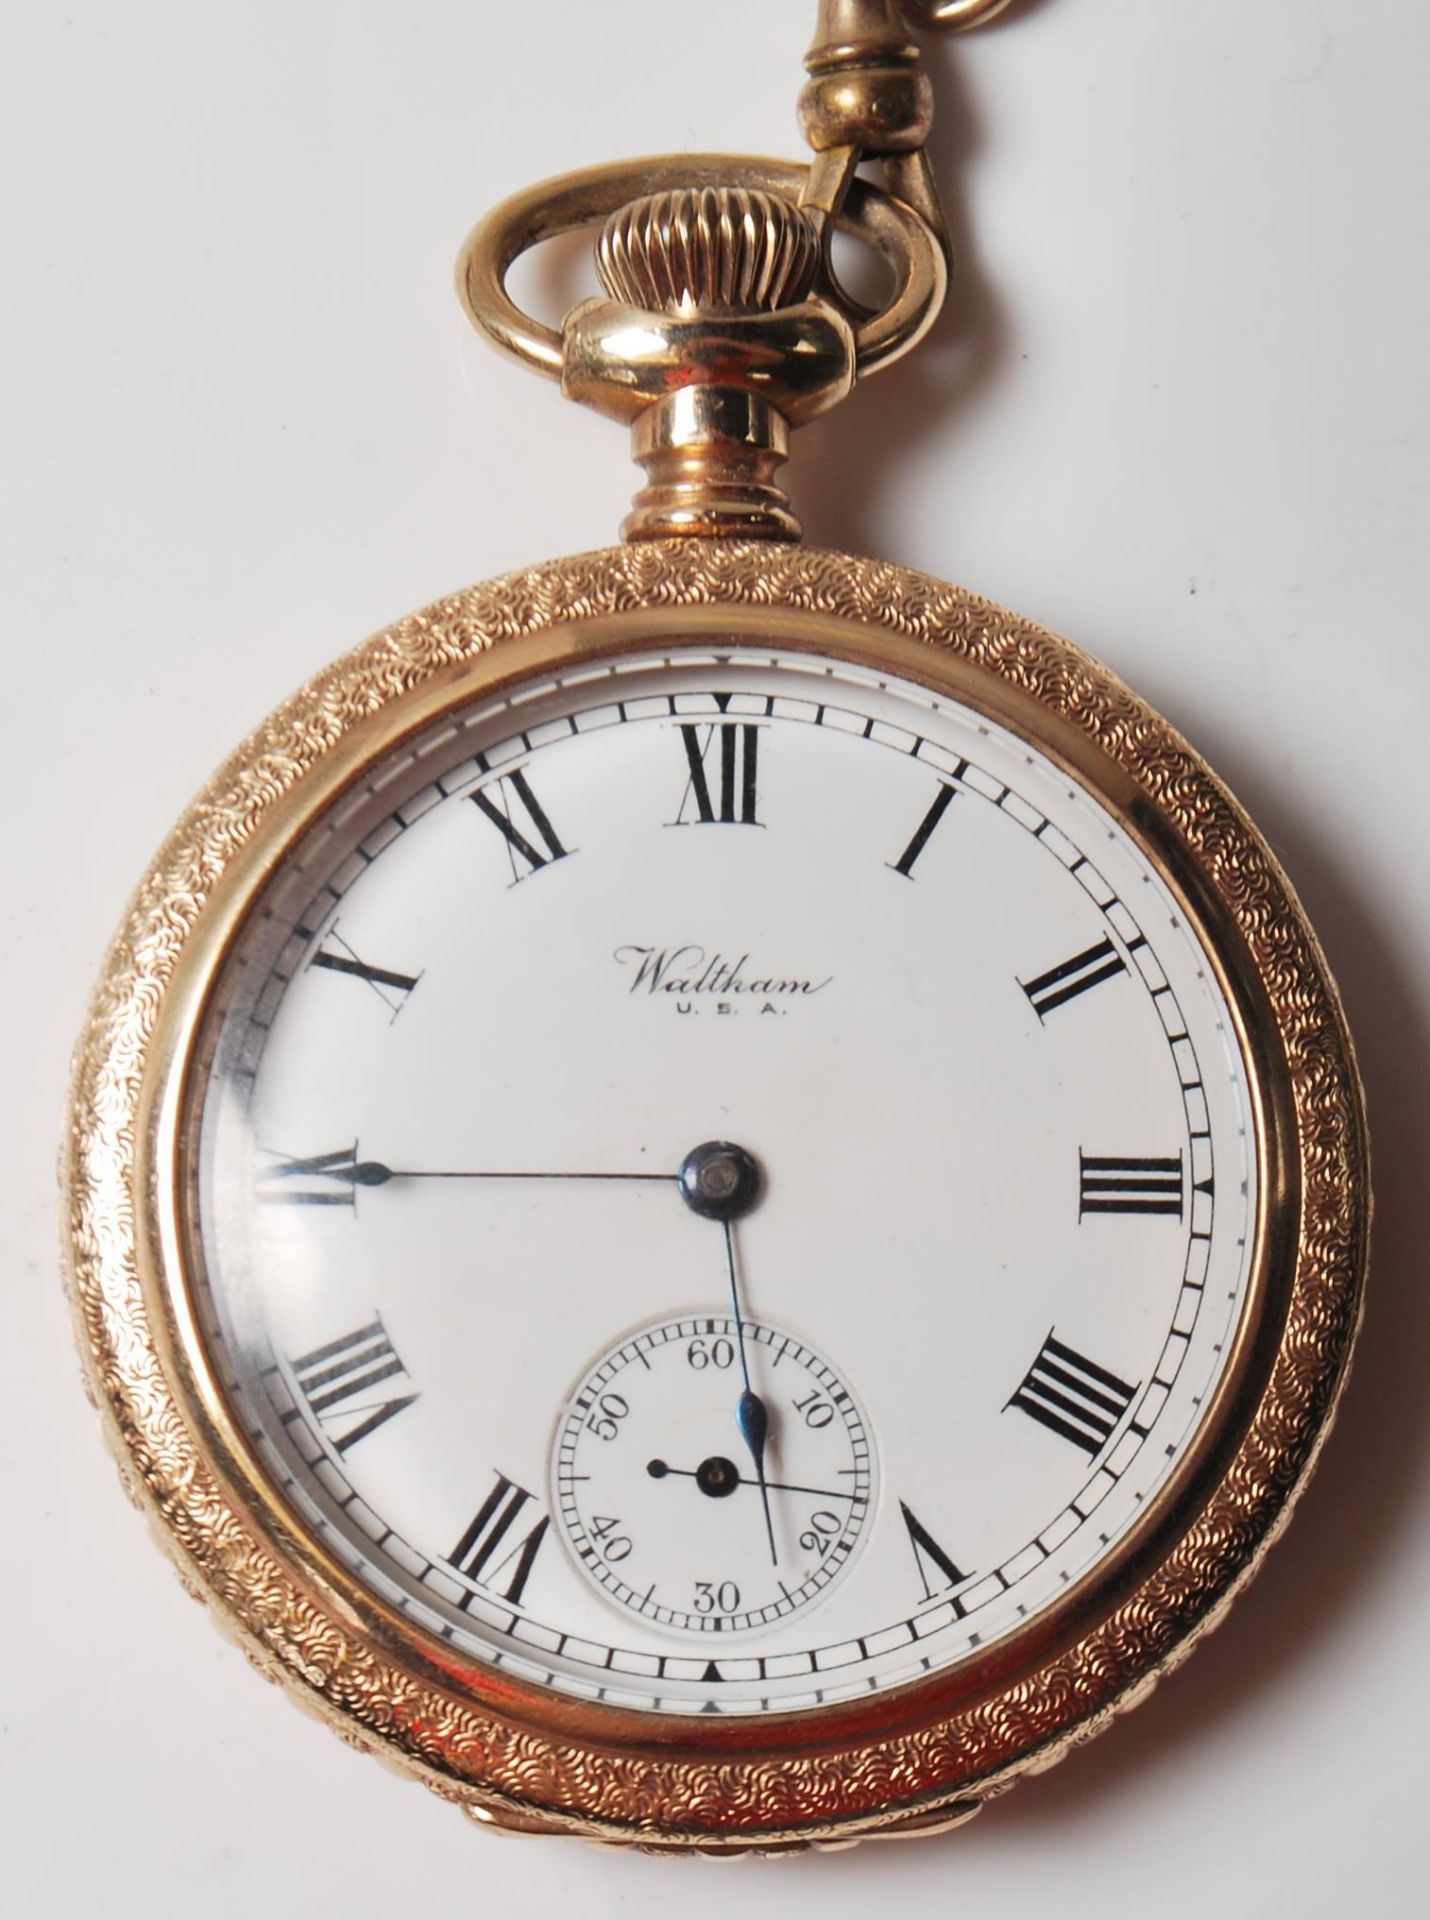 ANTIQUE WALTHAM USA POCKET WATCH WITH WWI FIRST WORLD WAR MEDAL - Image 2 of 8